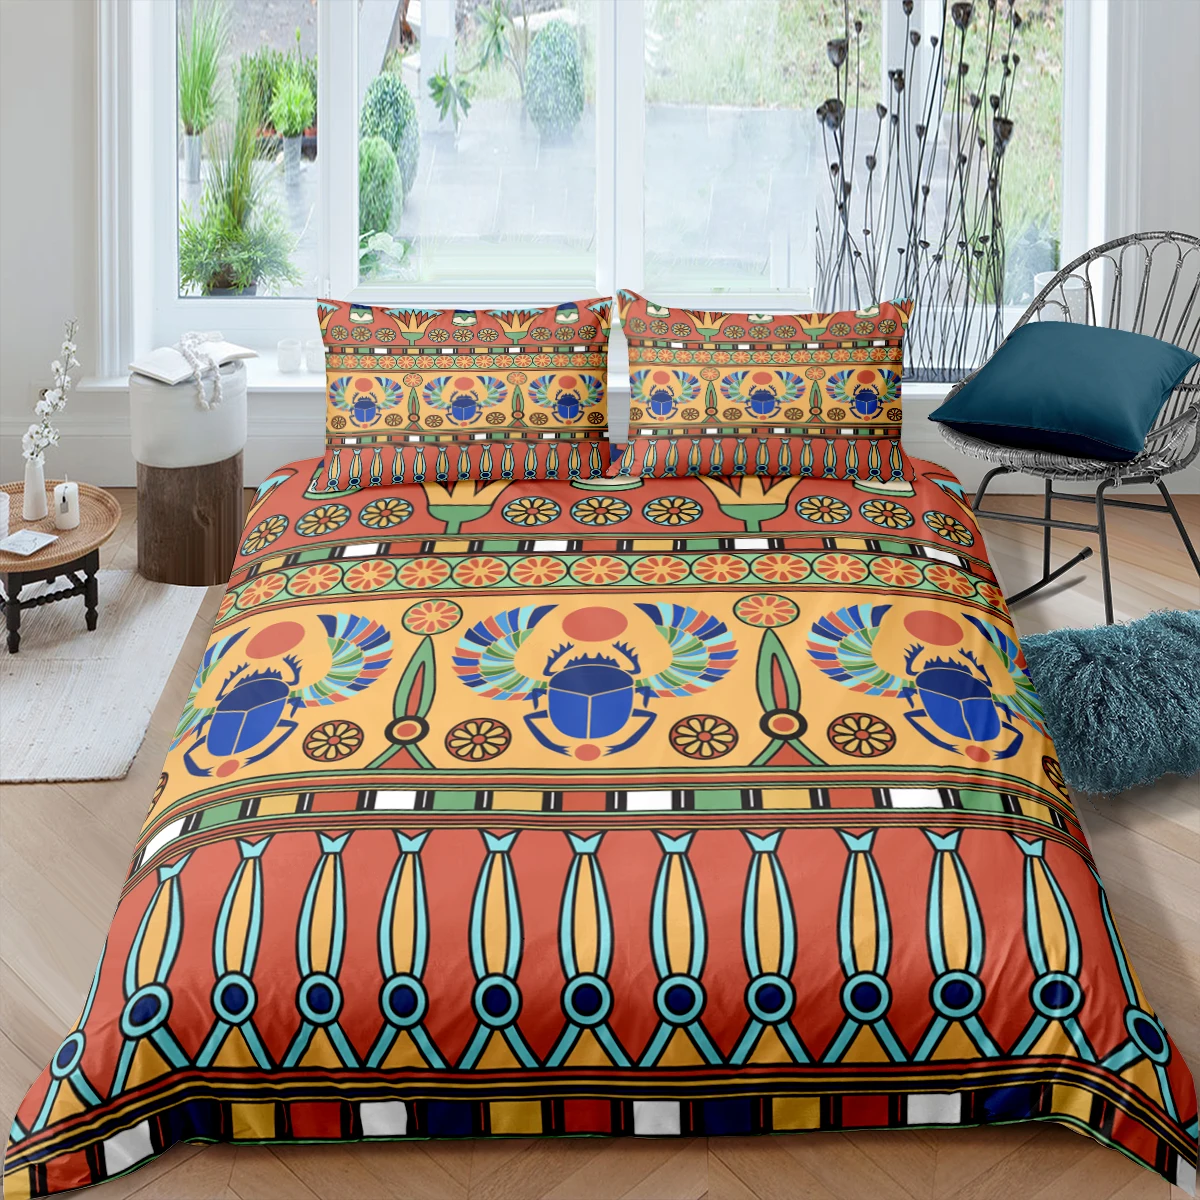 Home Living Luxury 3D Egyptian Bedding Set Ethnic Style Duvet Cover Pillowcase Queen and King EU/US/AU/UK Size Comforter Bedding